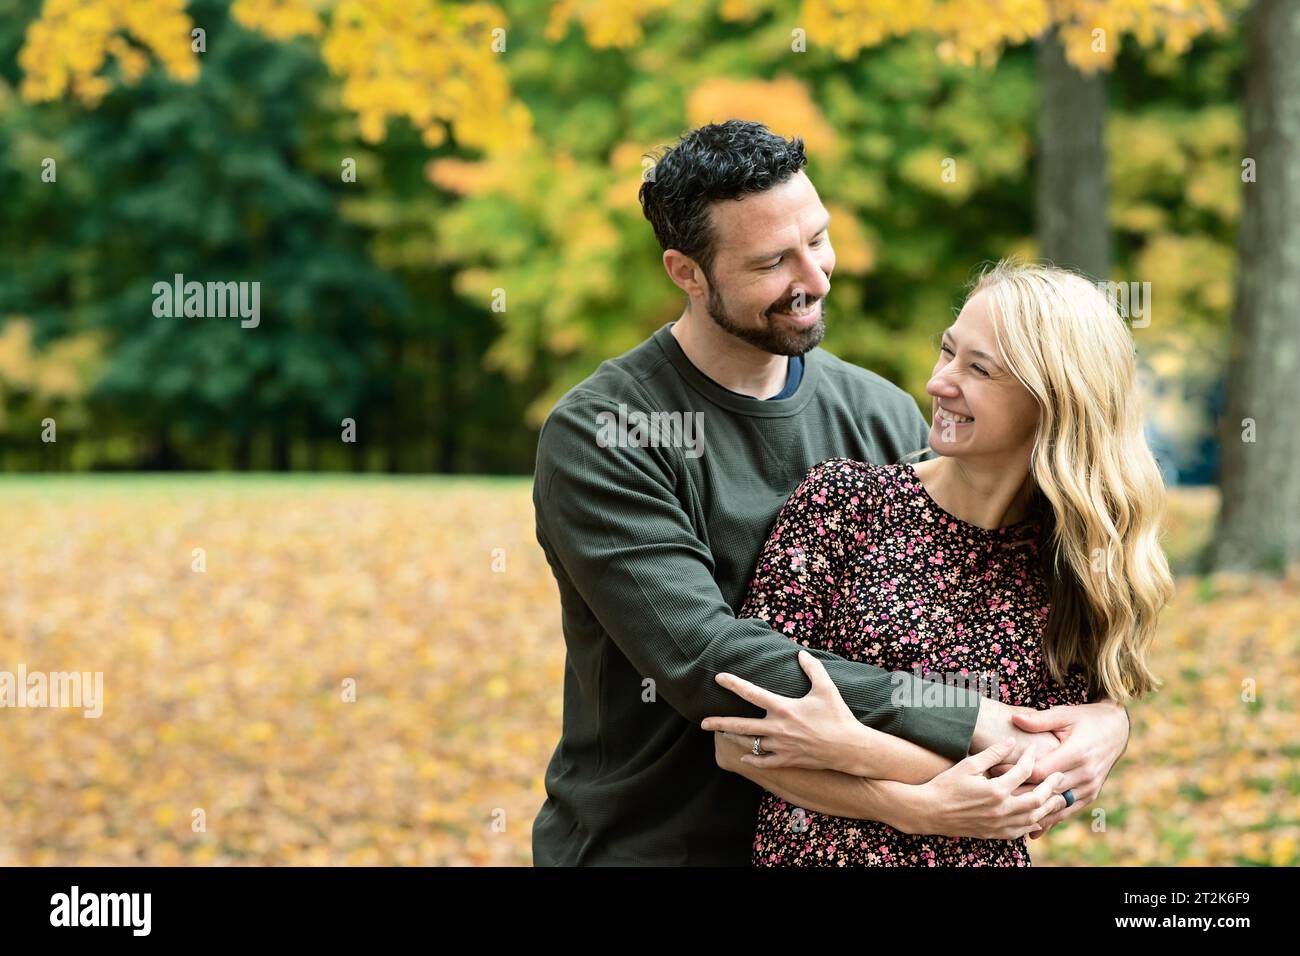 Husband and wife embracing, looking at each other smiling Stock Photo